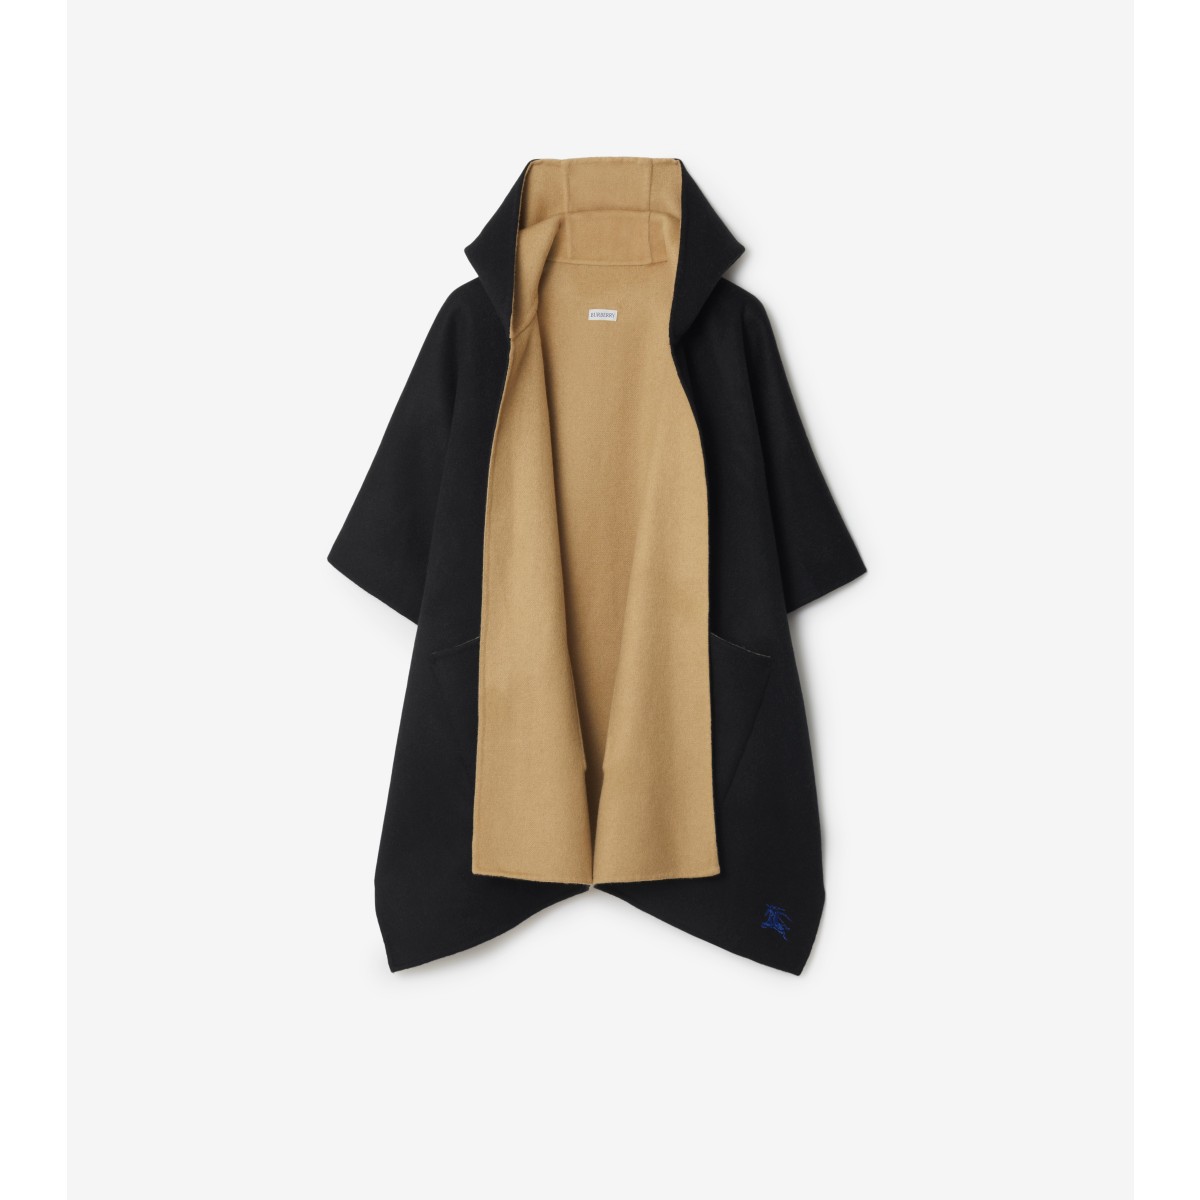 Burberry Ekd Cashmere Hooded Cape In Black/archive Beige